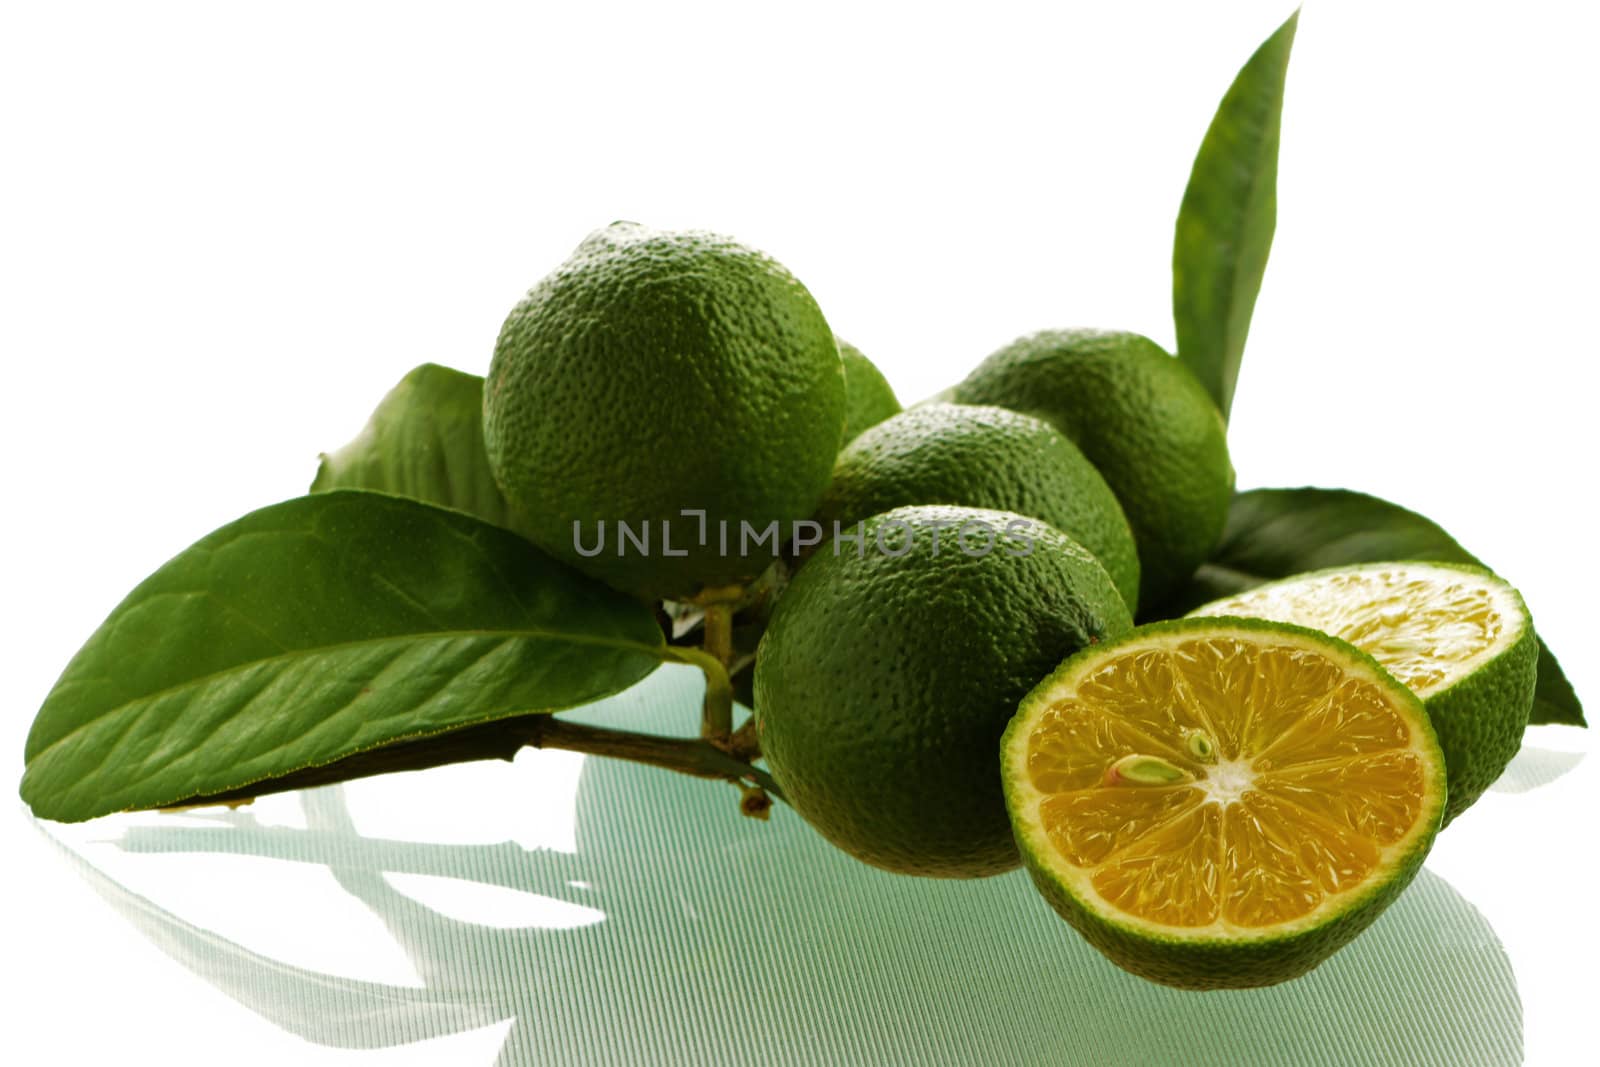 Fresh Picked Limes by billberryphotography